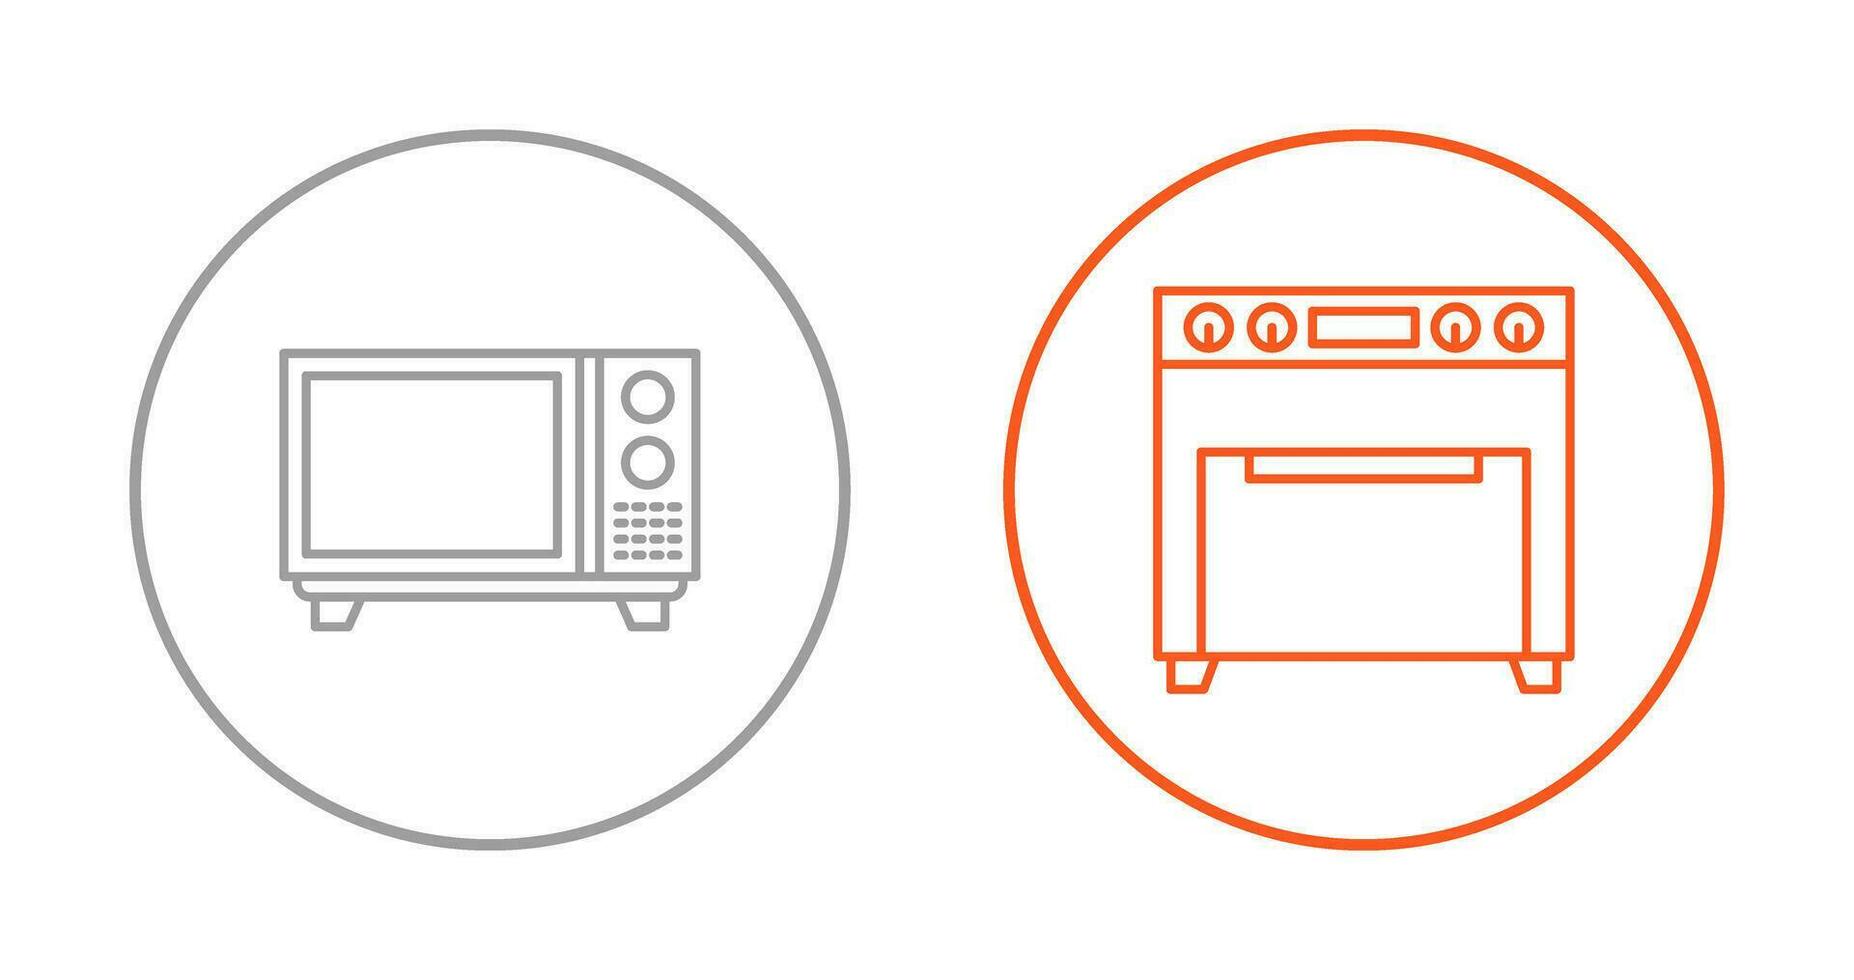 Microwave and Oven Icon vector